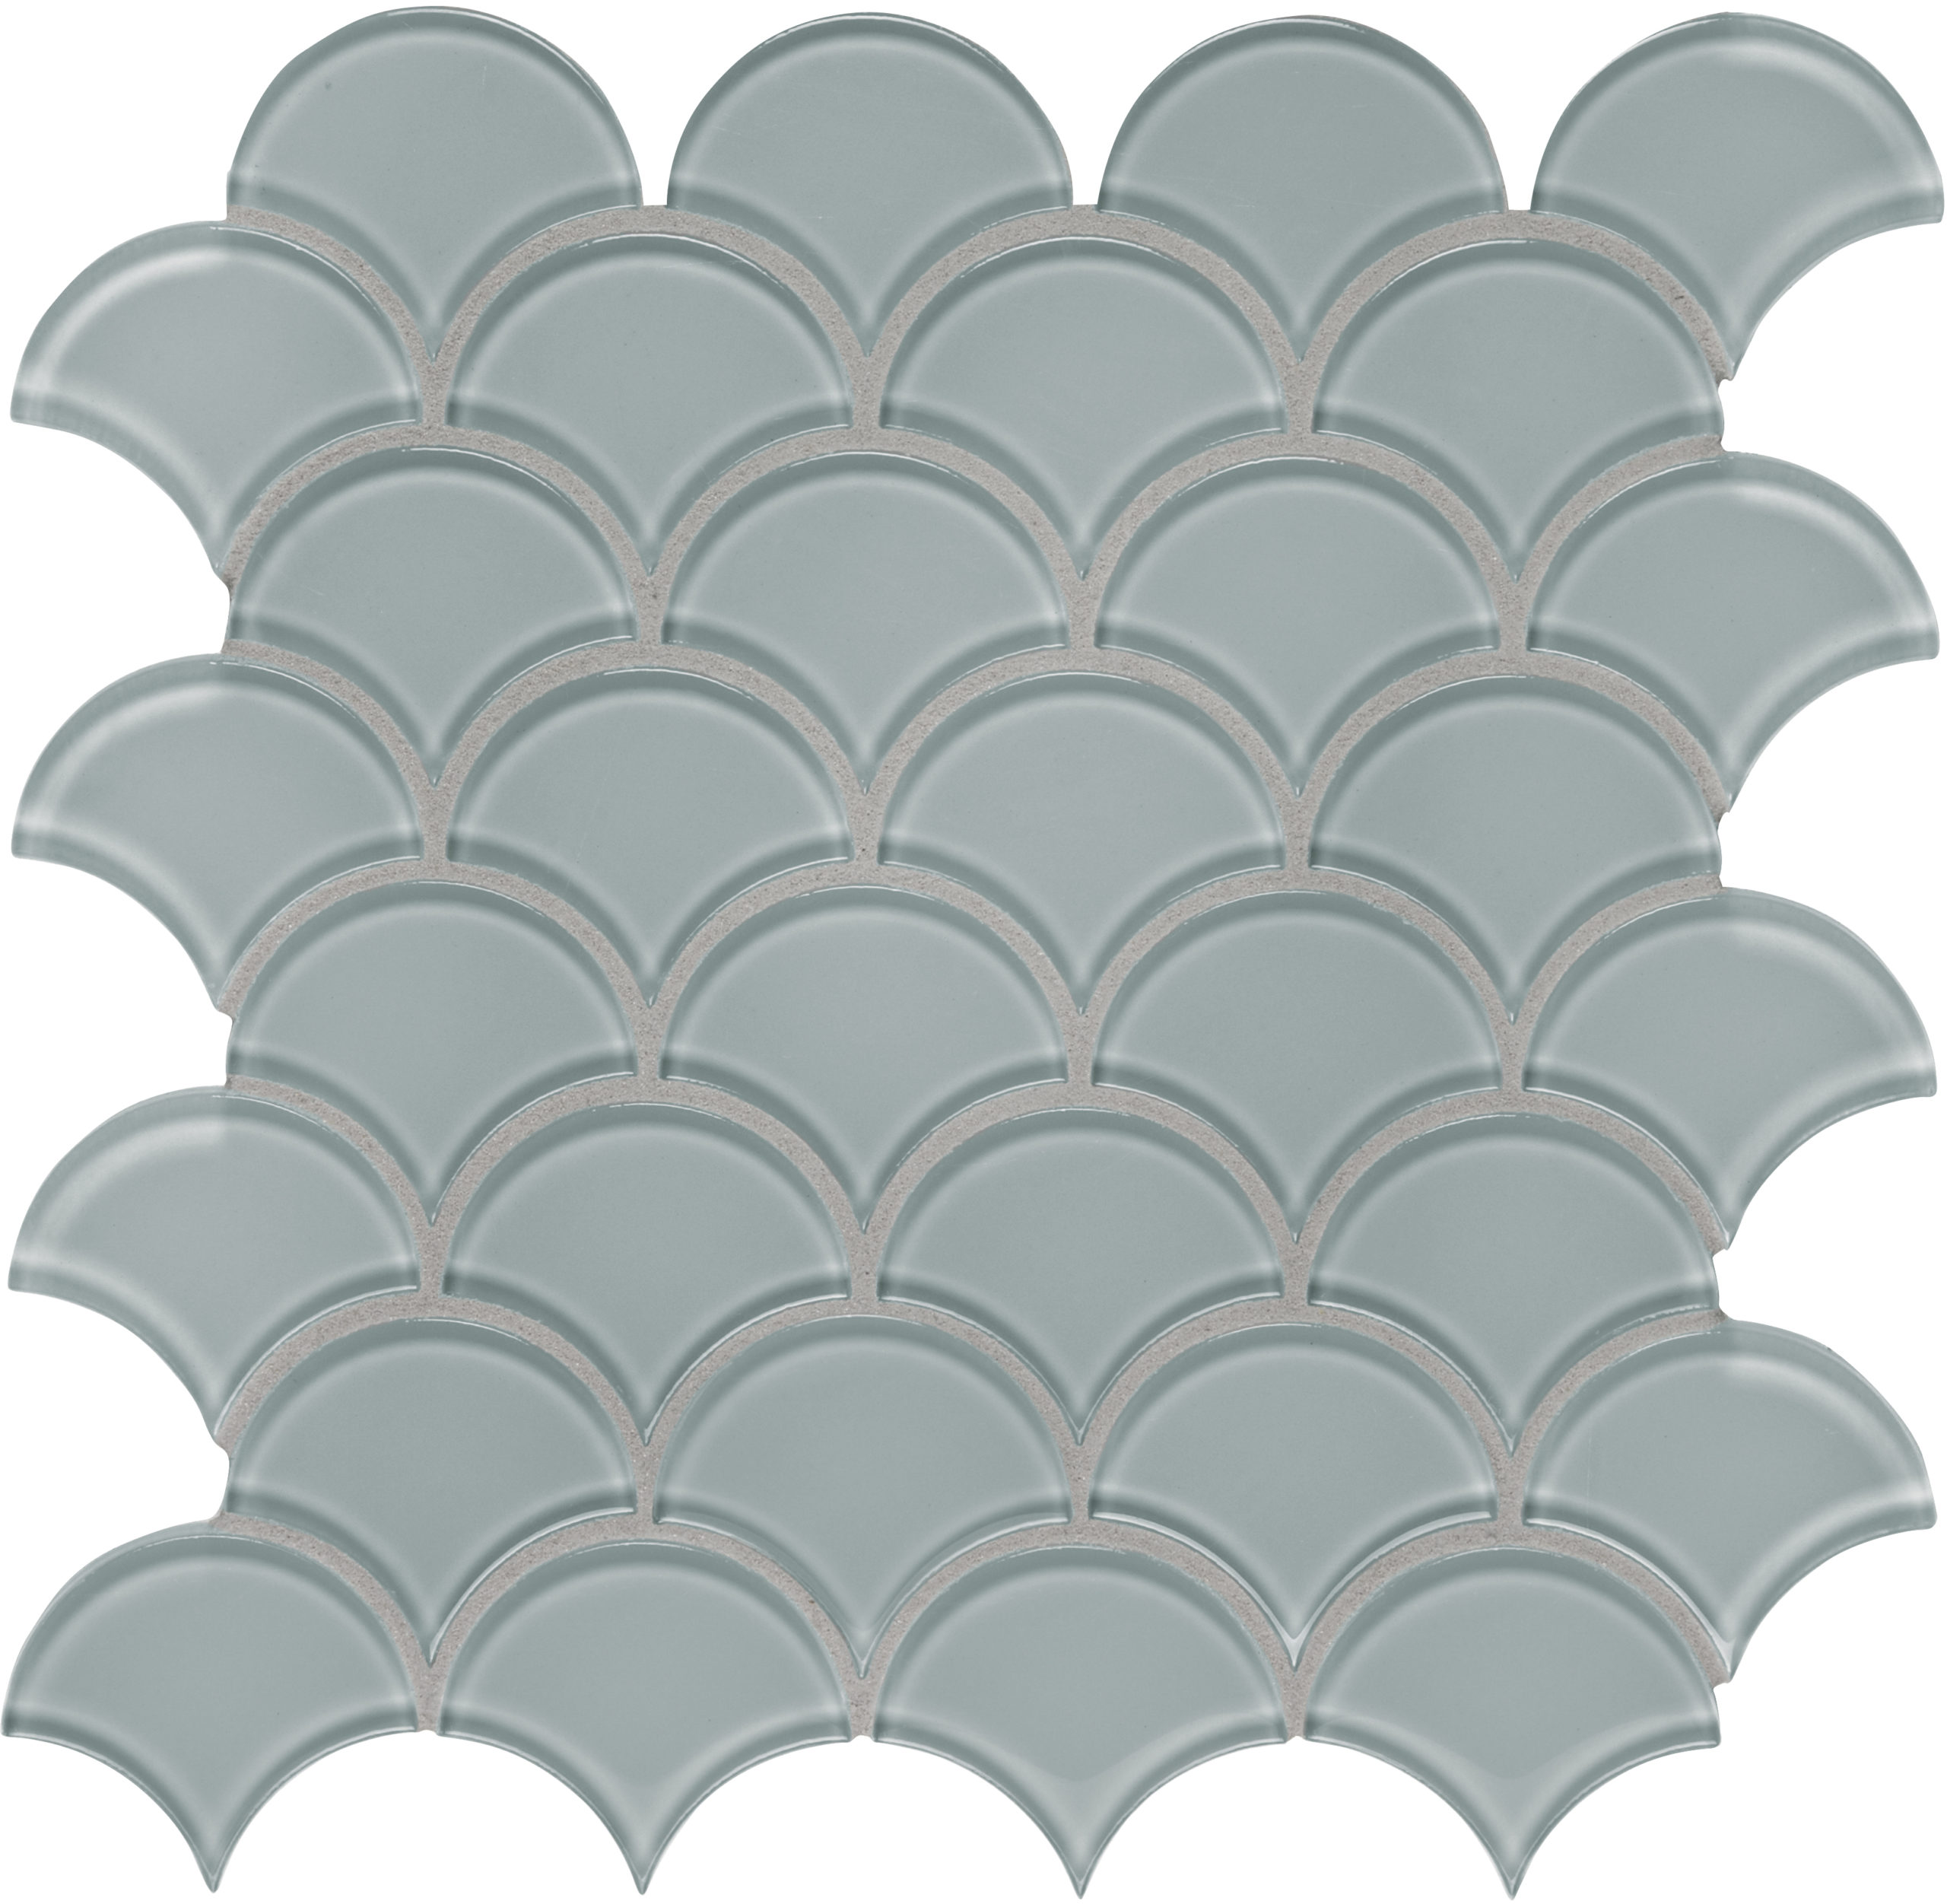 35 112 Element Shadow Glass Scallop Mosaics scaled